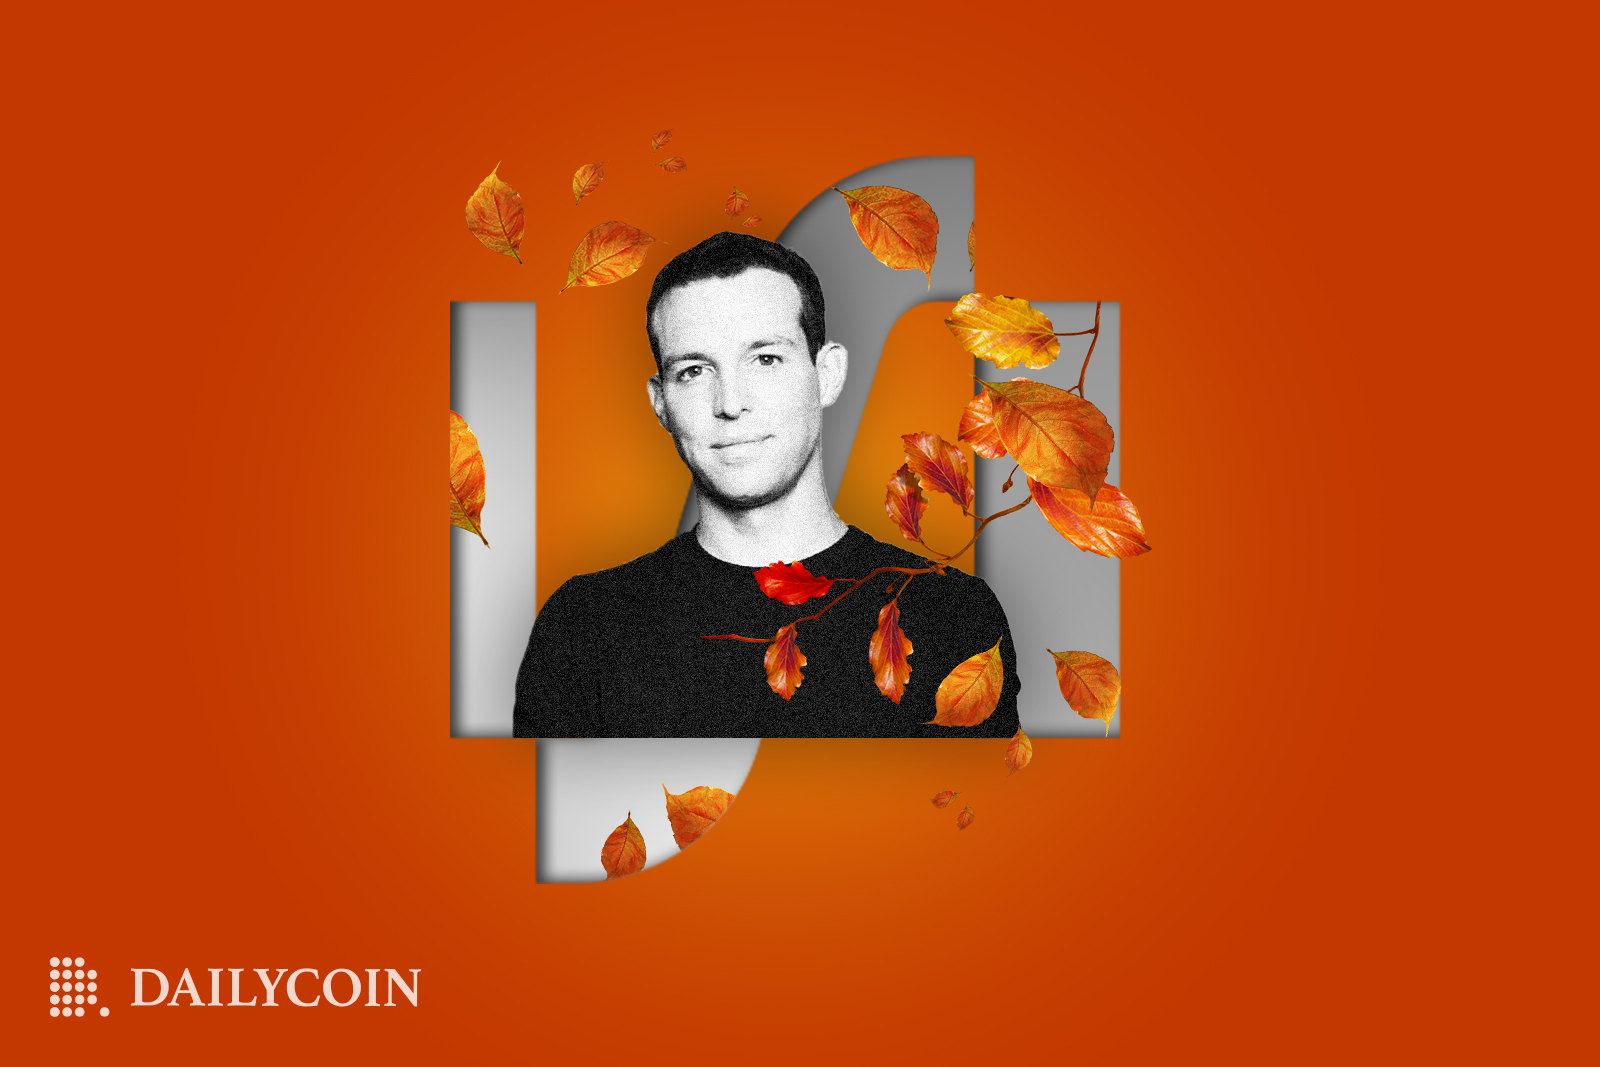 Block.One founder and CEO Brendan Blumer profile on a autumn leafes themed background with Block.One logo